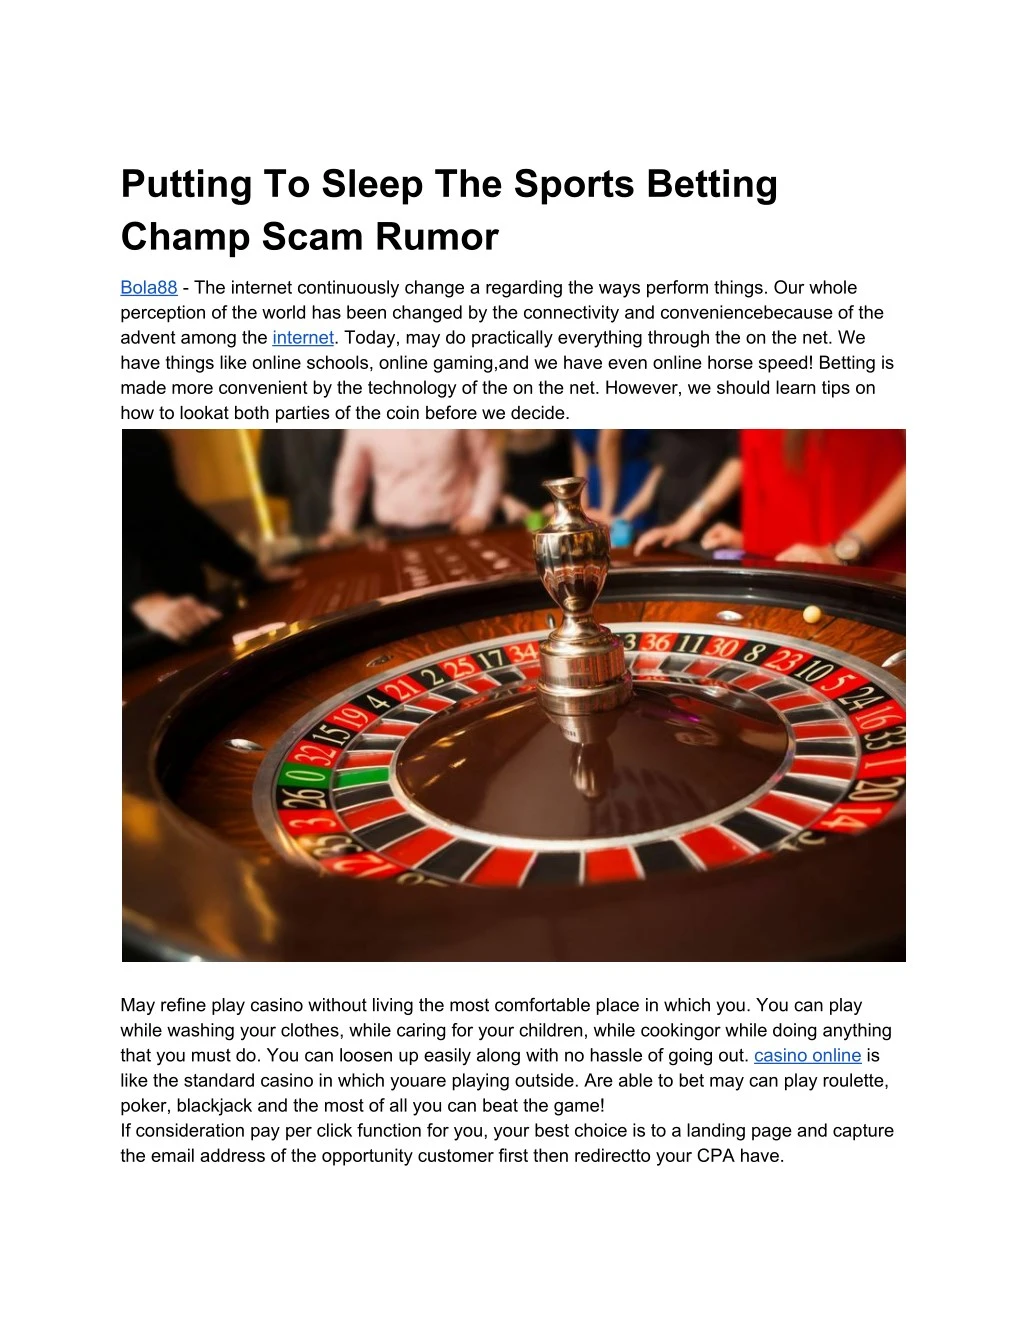 putting to sleep the sports betting champ scam